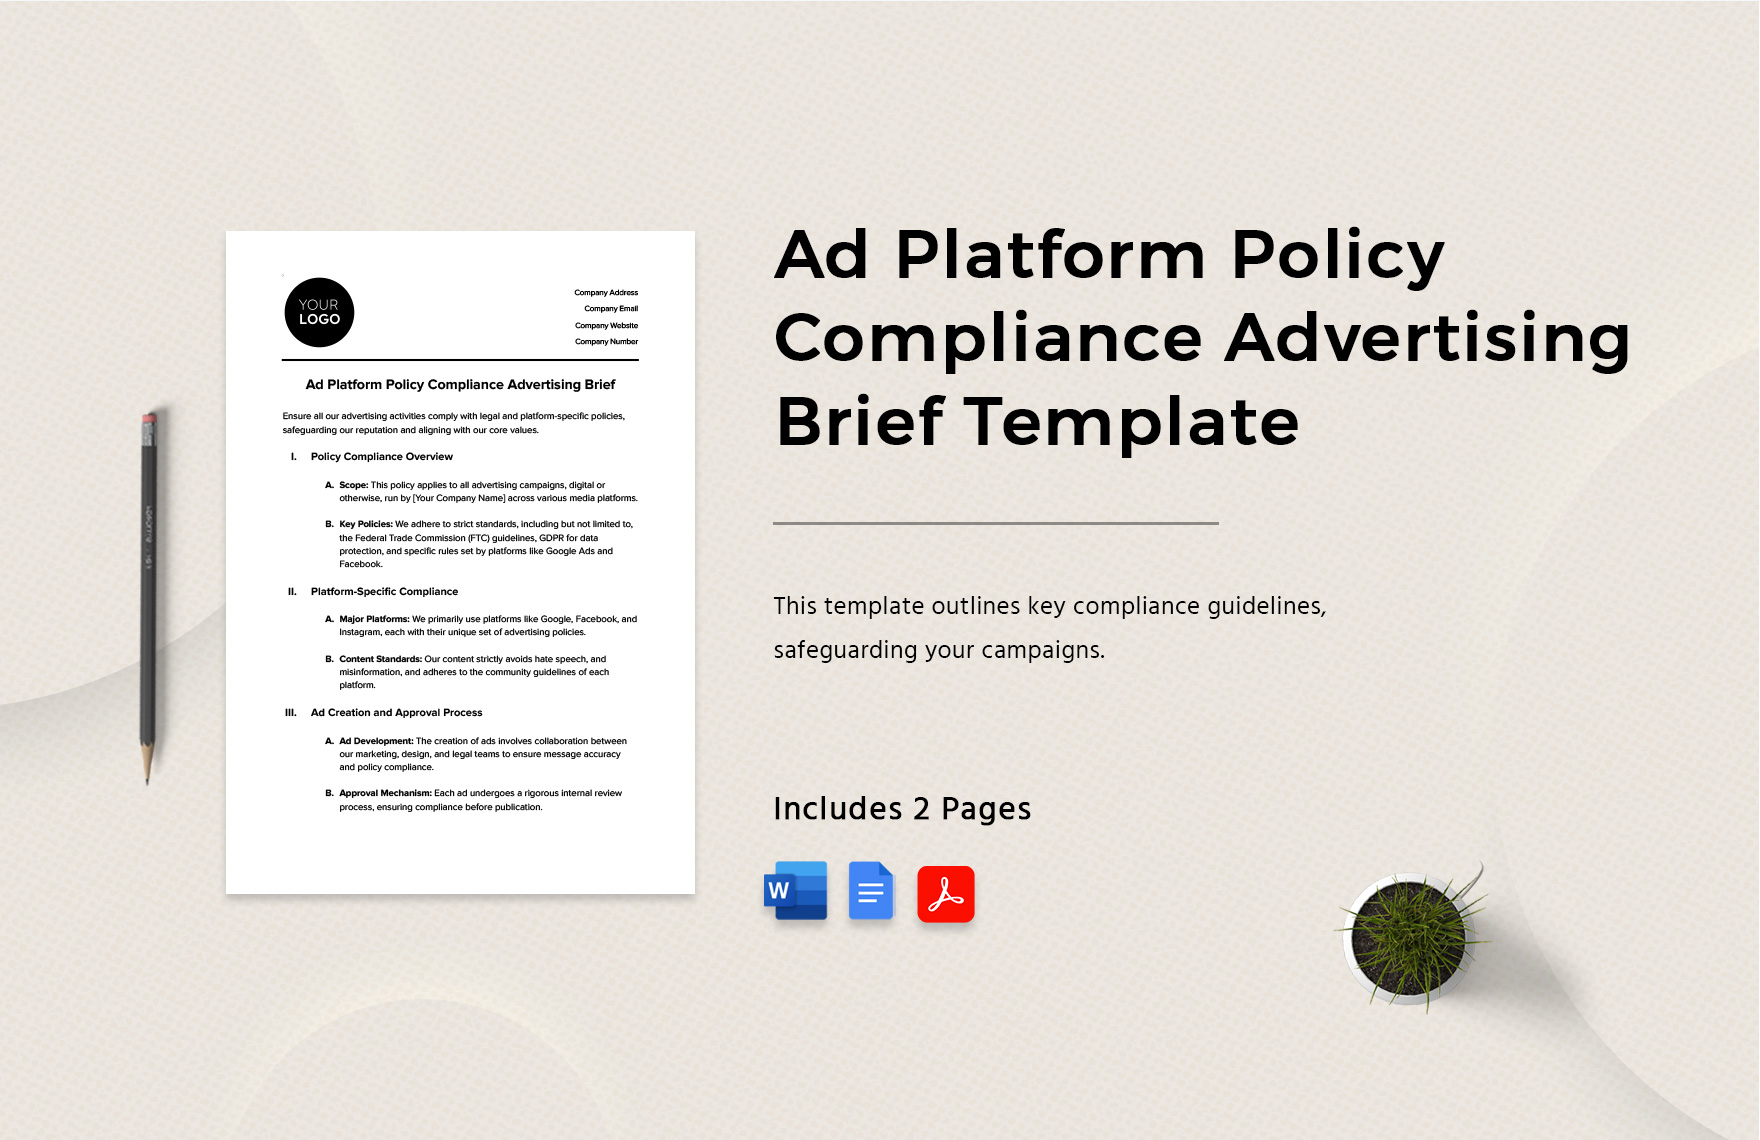 Ad Platform Policy Compliance Advertising Brief Template